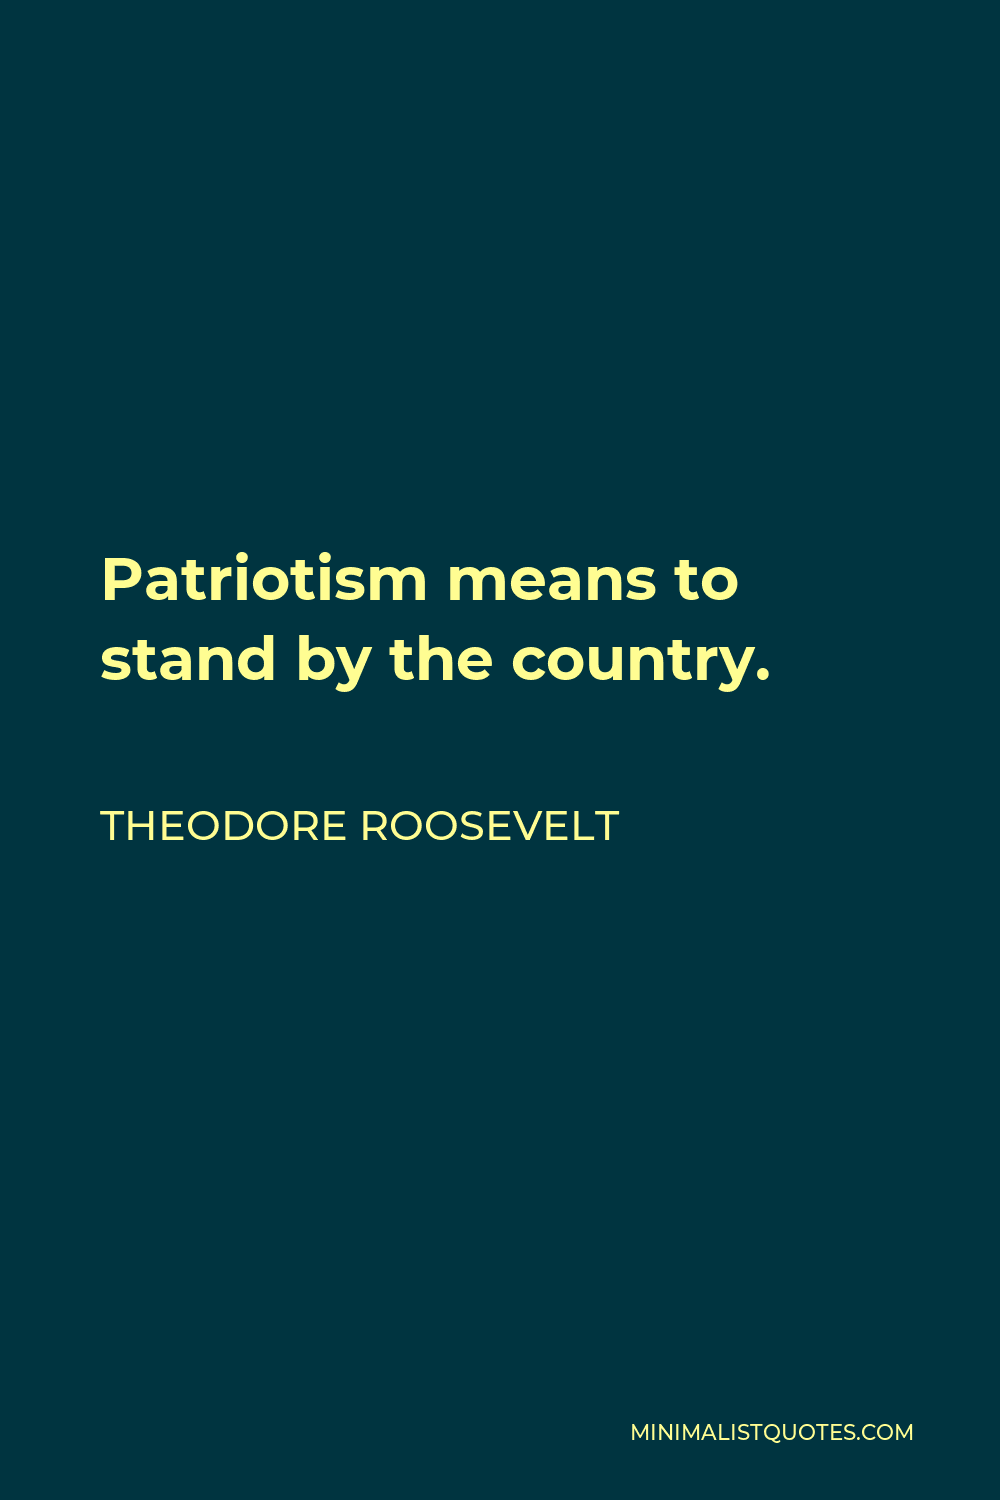 Theodore Roosevelt Quote - Patriotism means to stand by the country.